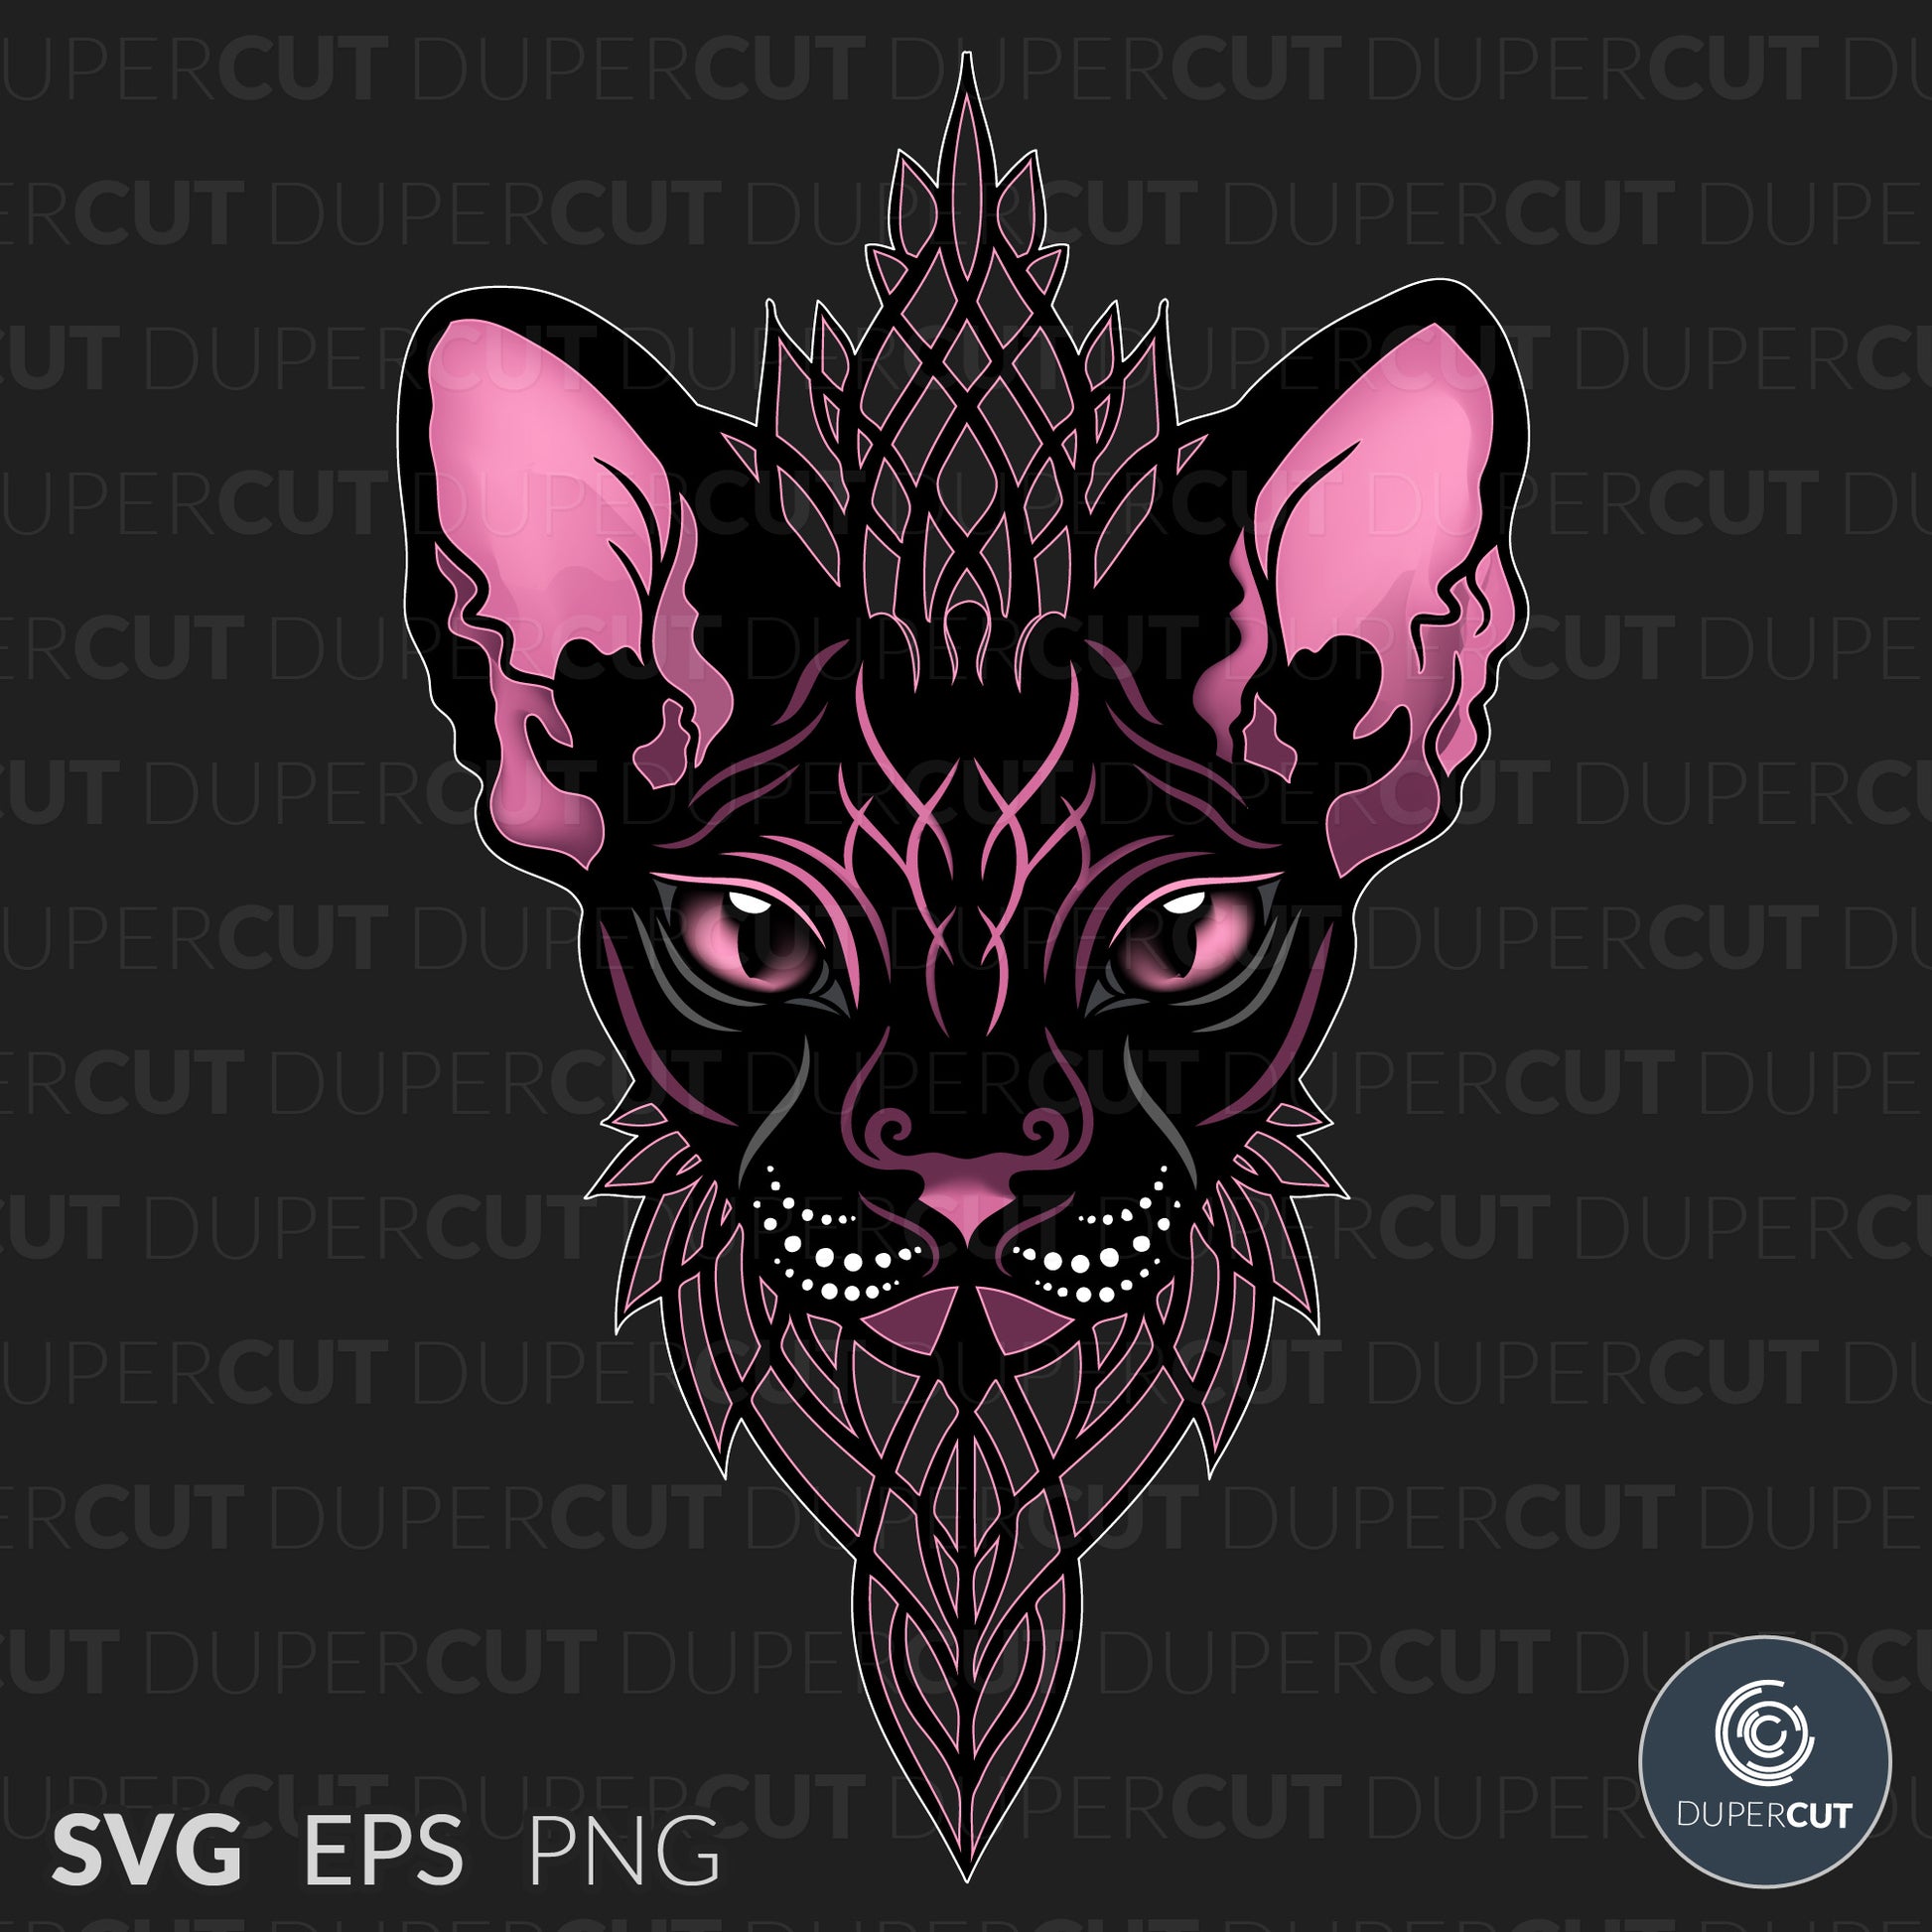 Sphynx Cat bright pink - EPS, SVG, PNG files. Vector Colour illustration for print on demand, sublimation, custom t-shirts, hoodies, tumblers.